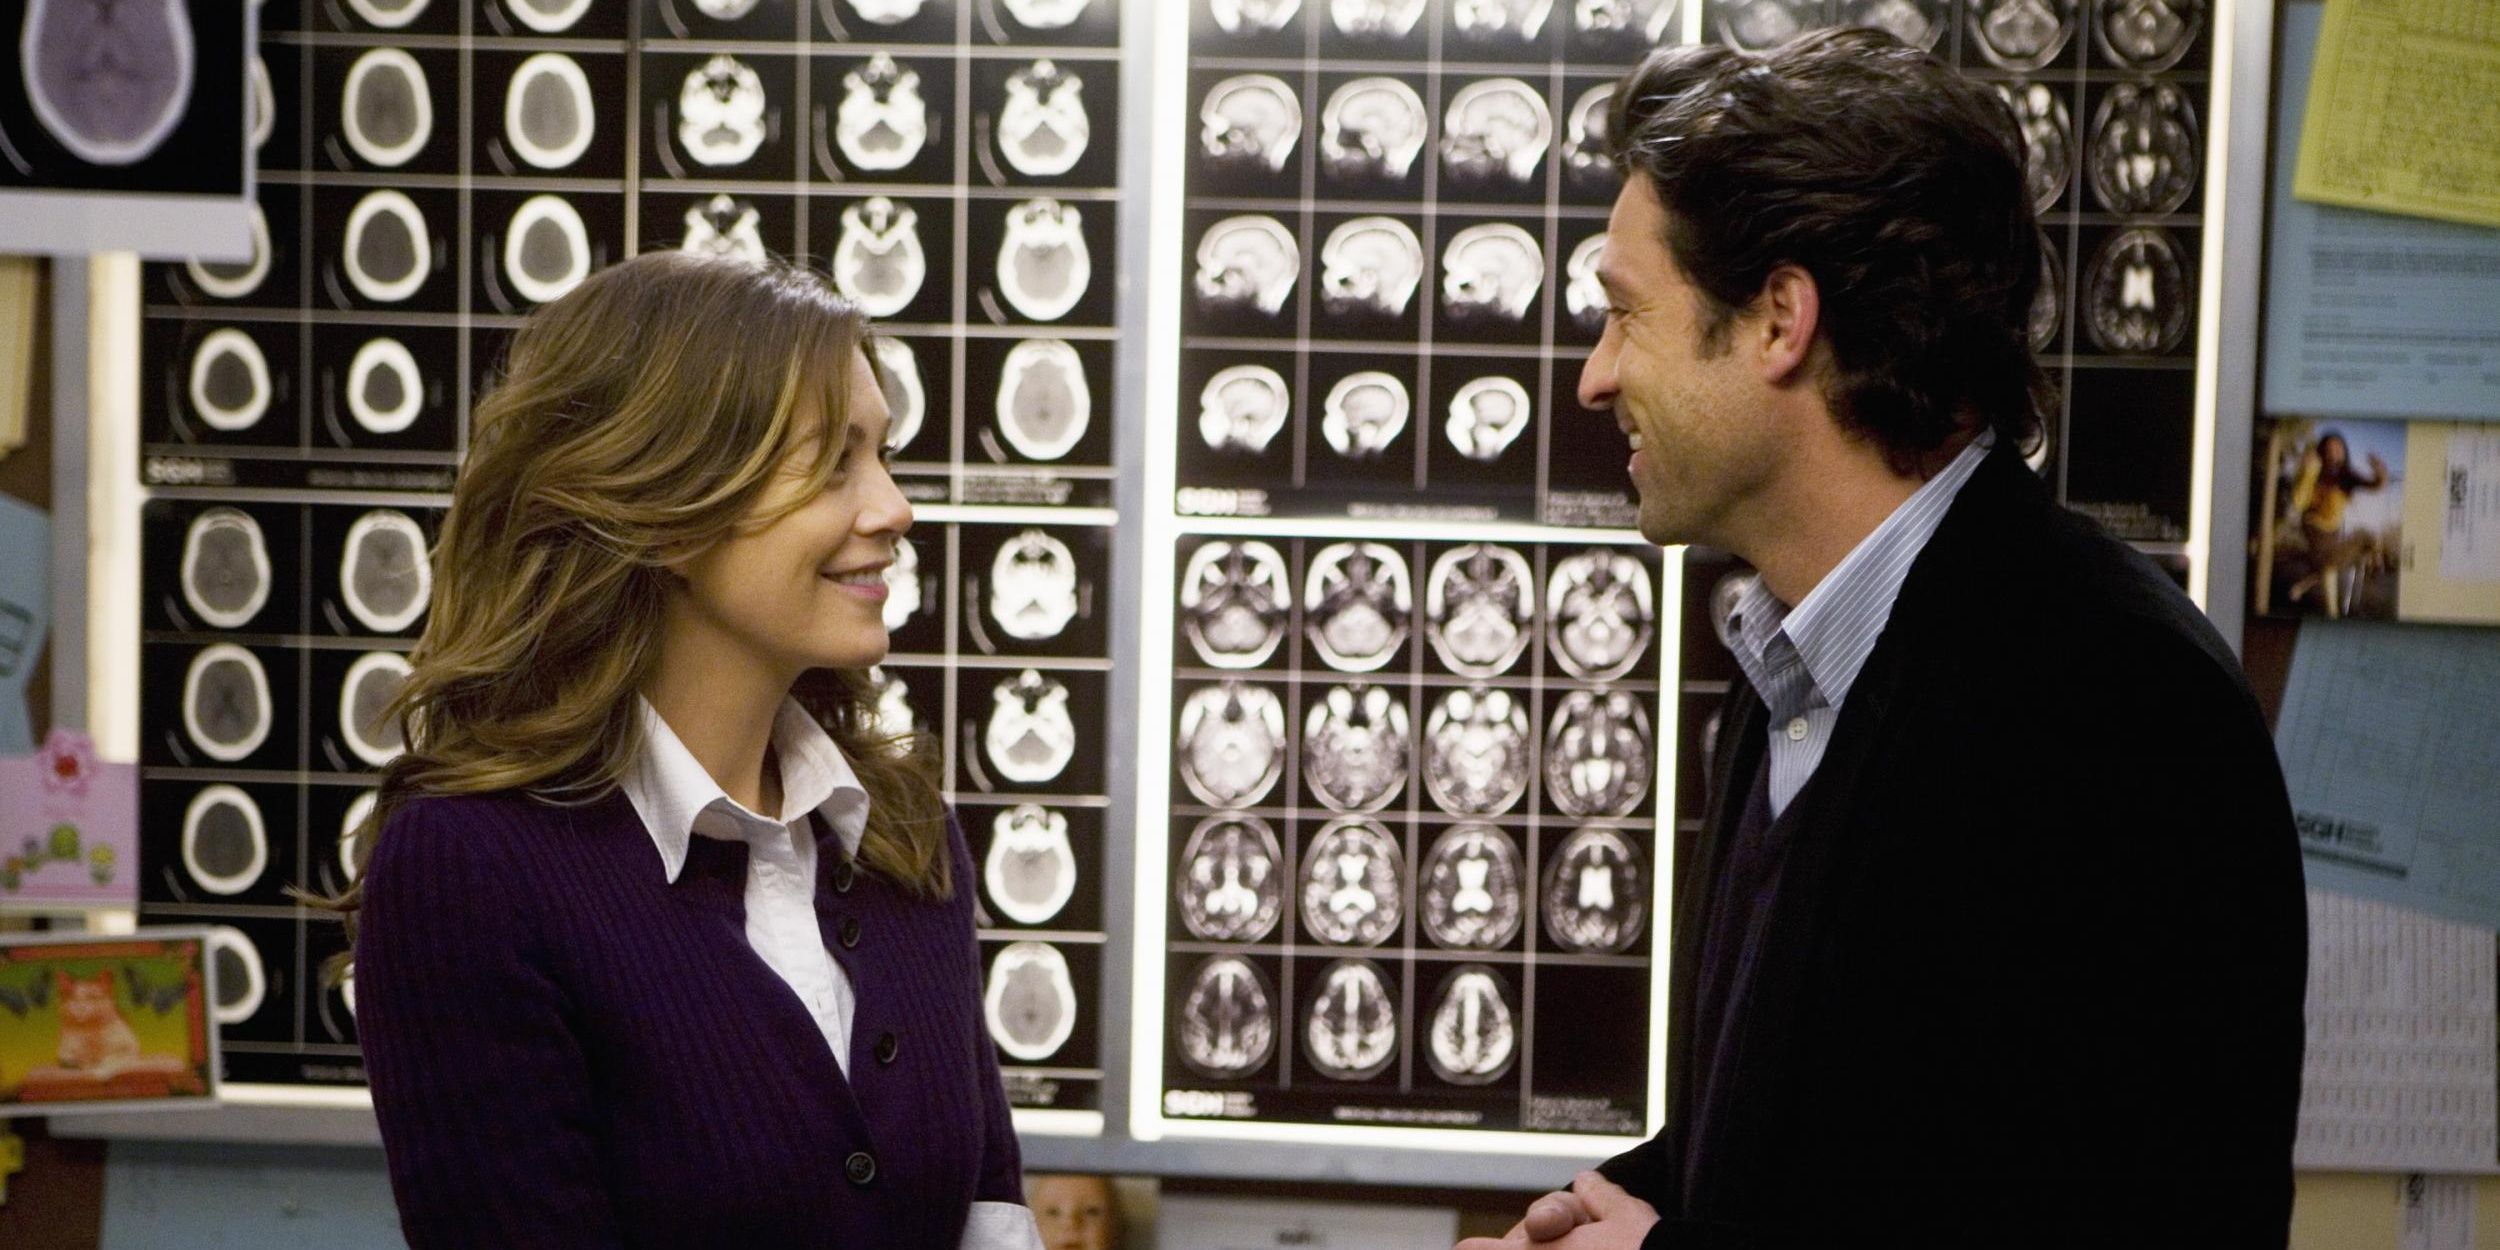 Greys Anatomy 10 Most Heartwarming Quotes In The Series